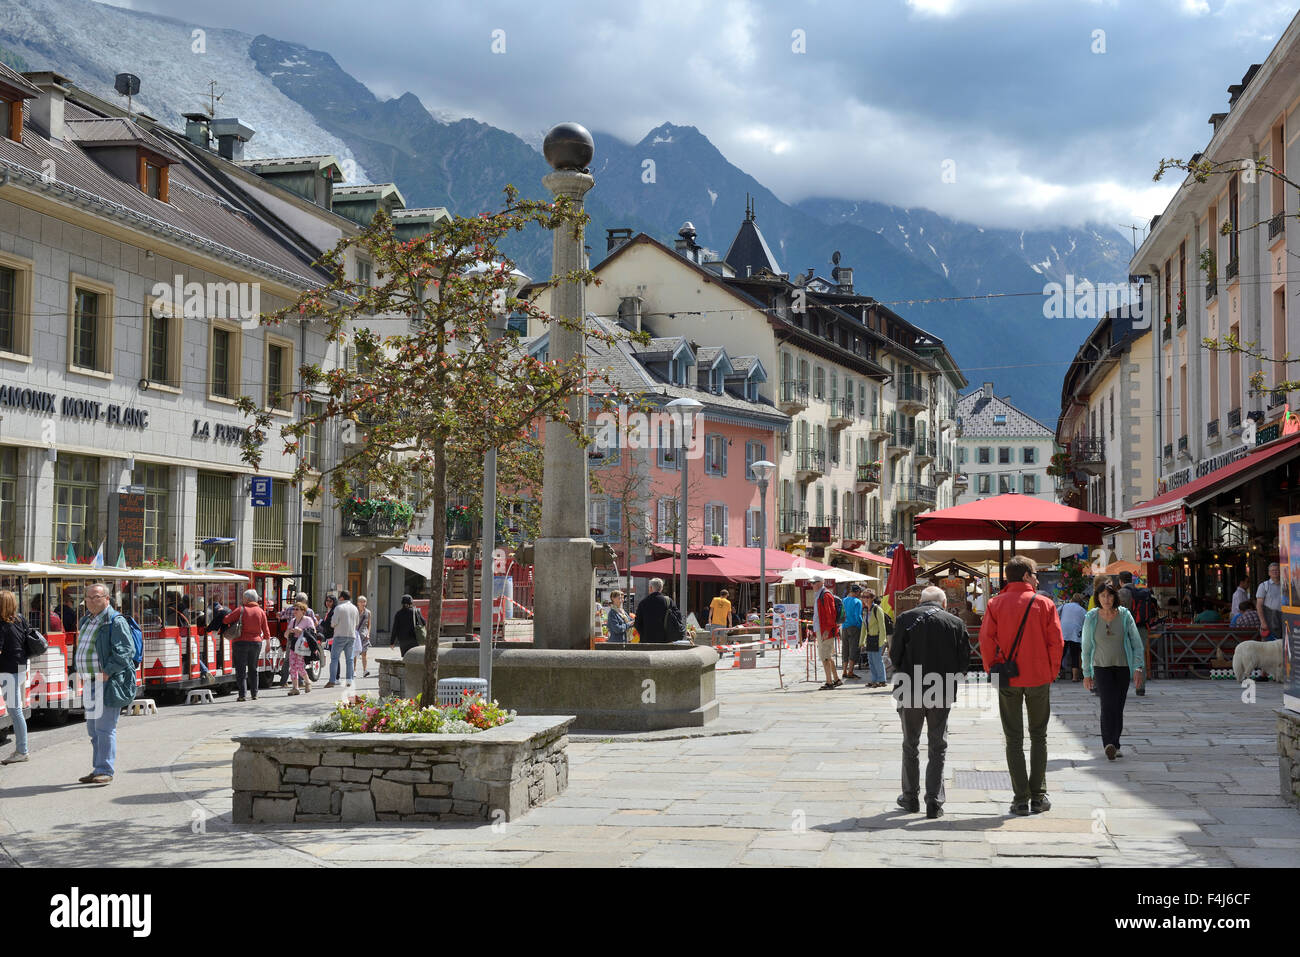 Shops in centre of town, Chamonix Mont Blanc, French Alps, Haute Savoie, France, Europe Stock Photo